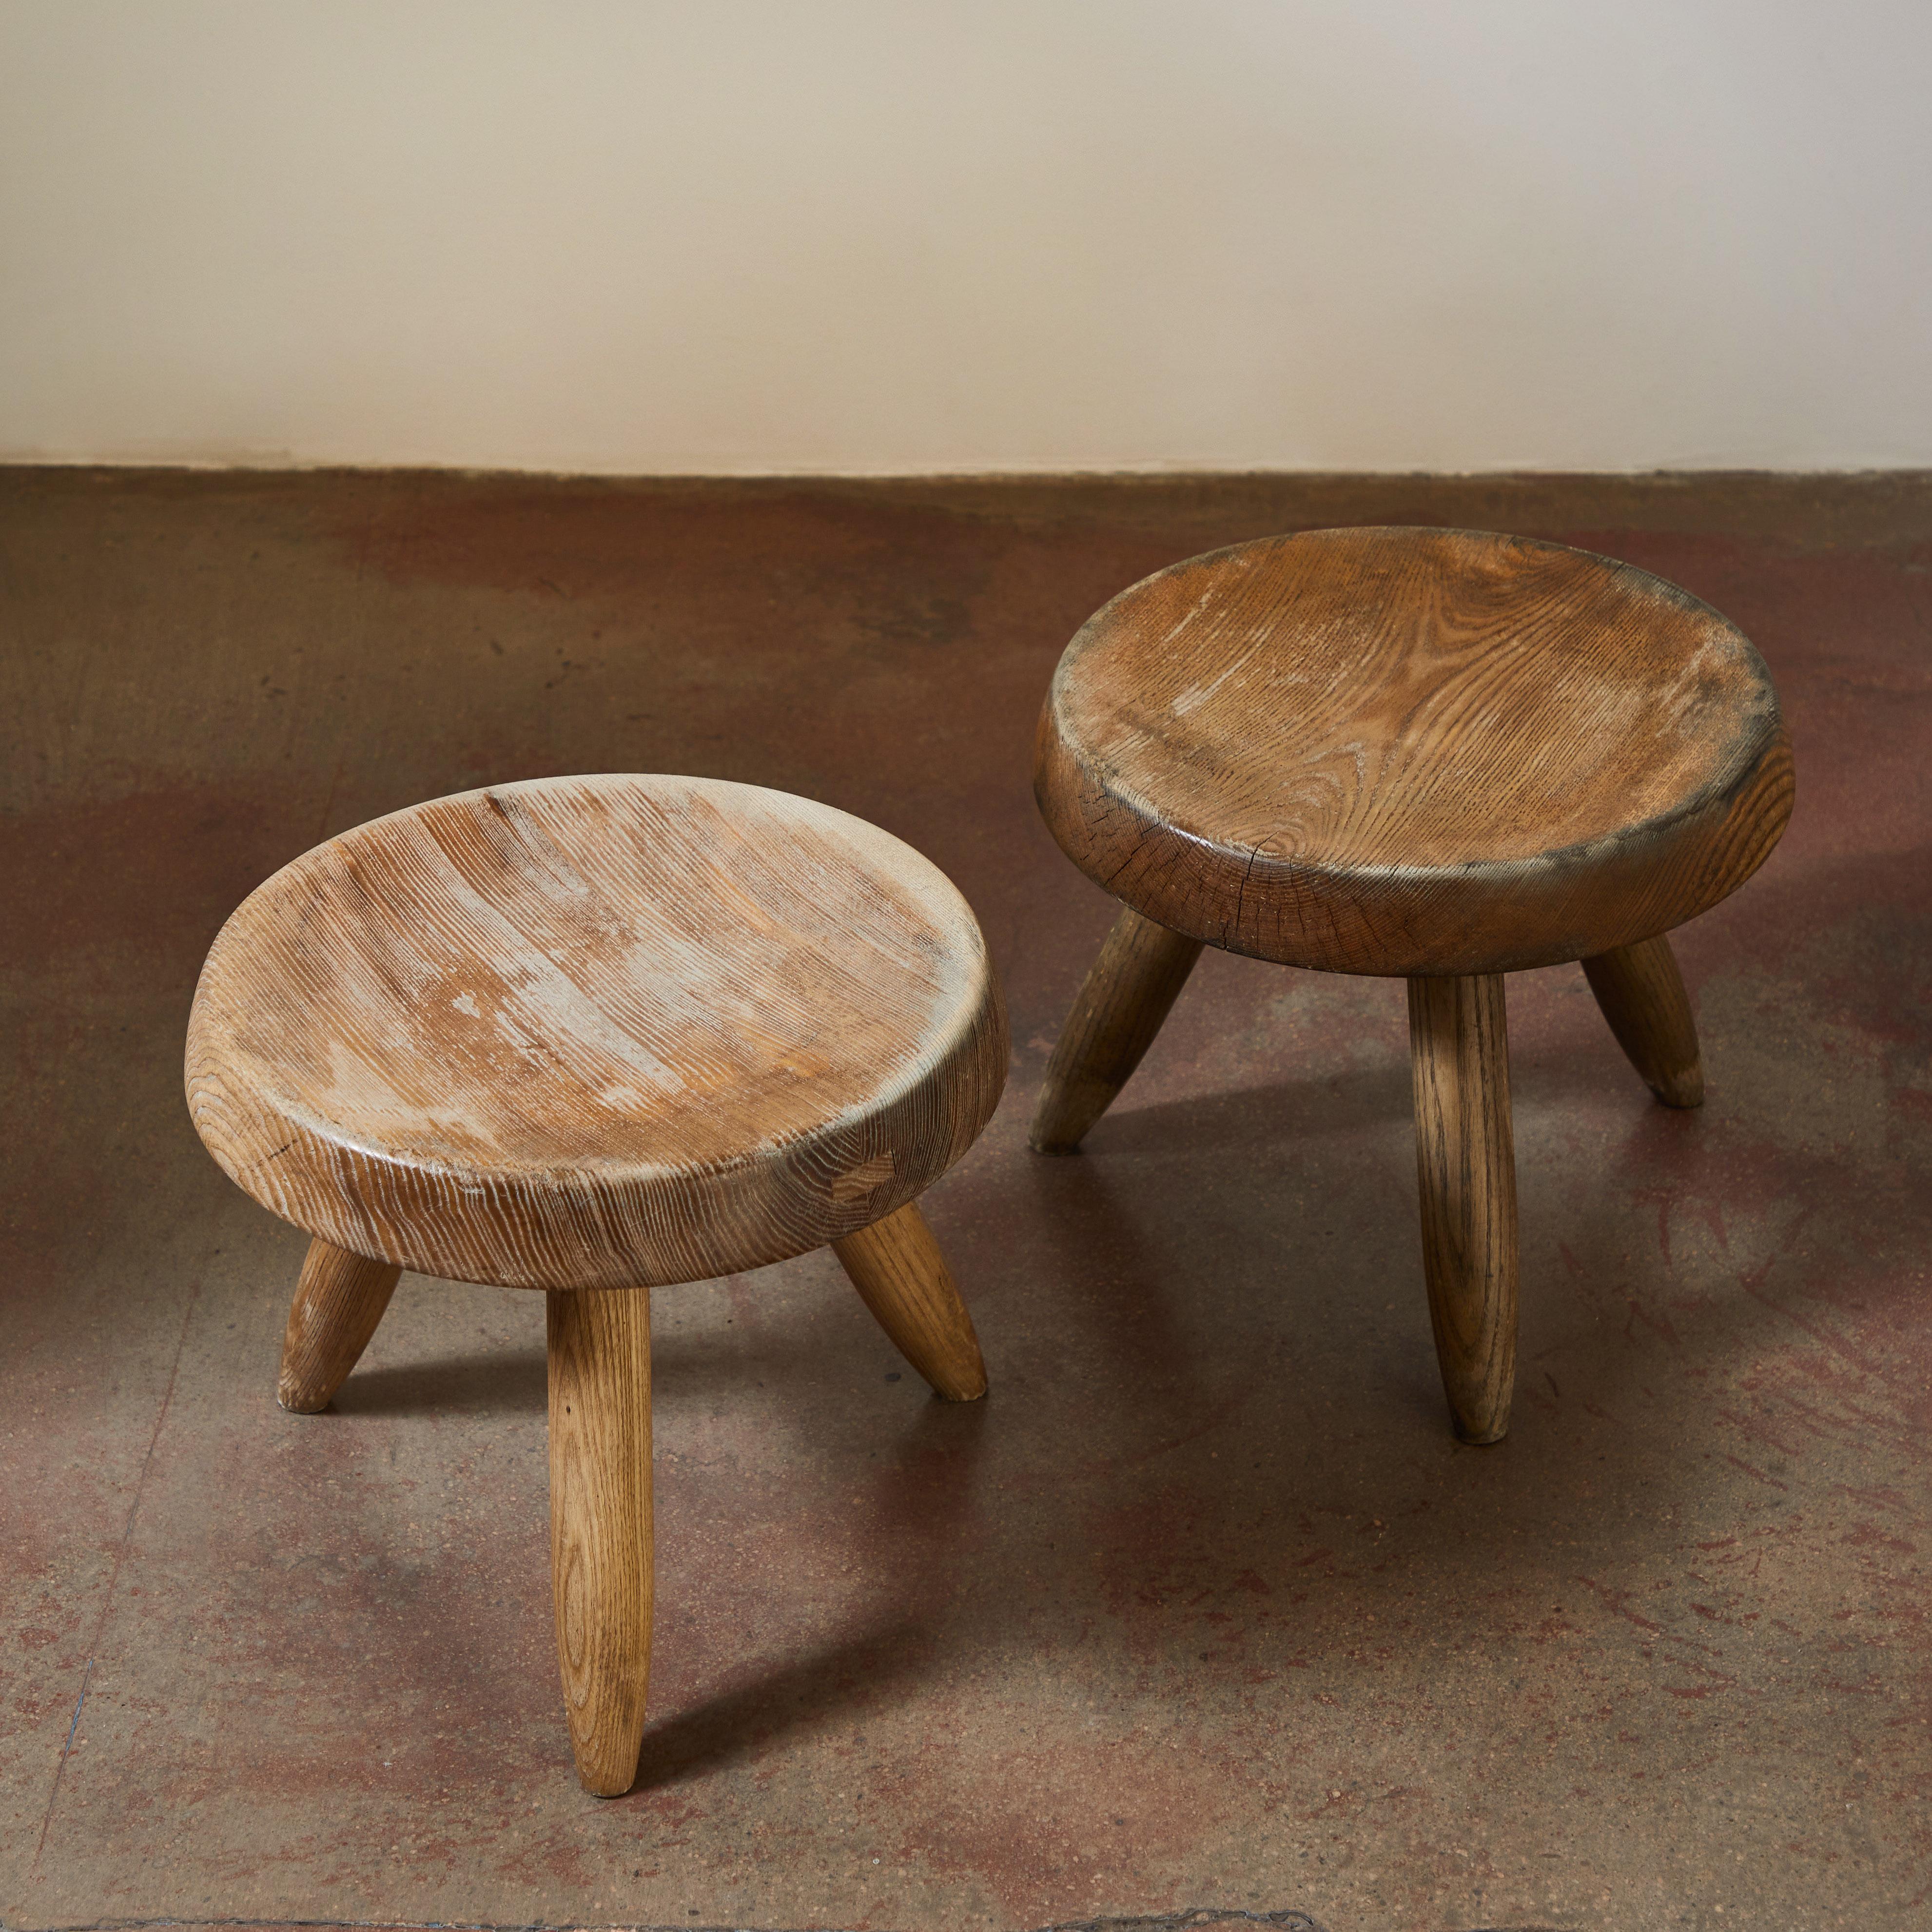 Stools by Charlotte Perriand 2